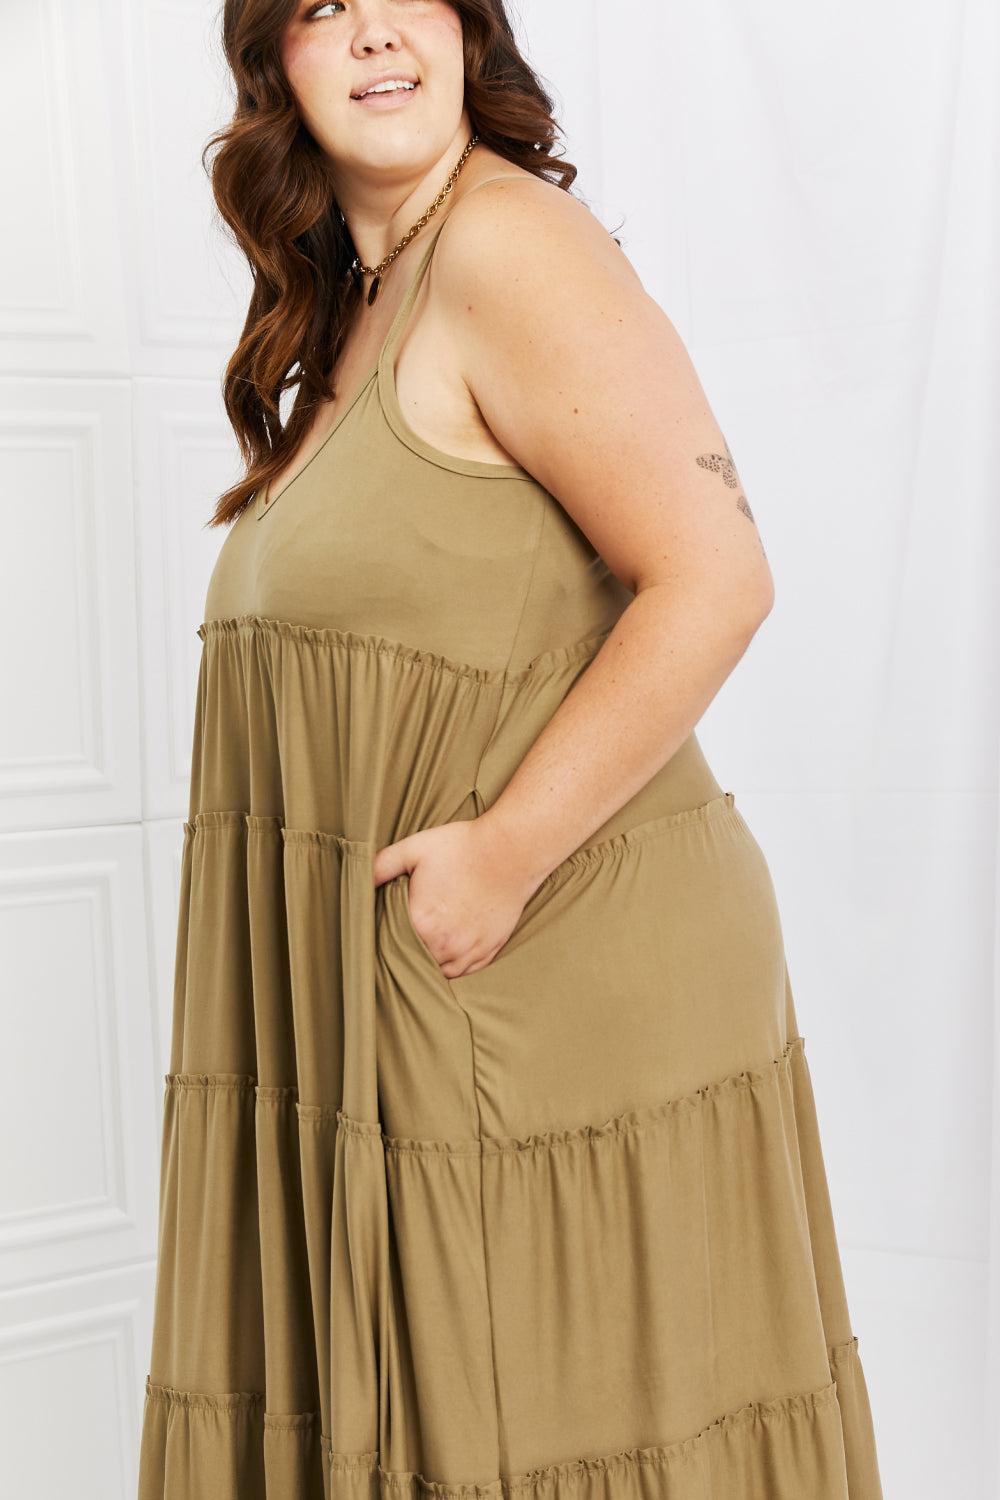 Zenana Full Size Spaghetti Strap Tiered Dress with Pockets in Khaki-Dresses-Inspired by Justeen-Women's Clothing Boutique in Chicago, Illinois